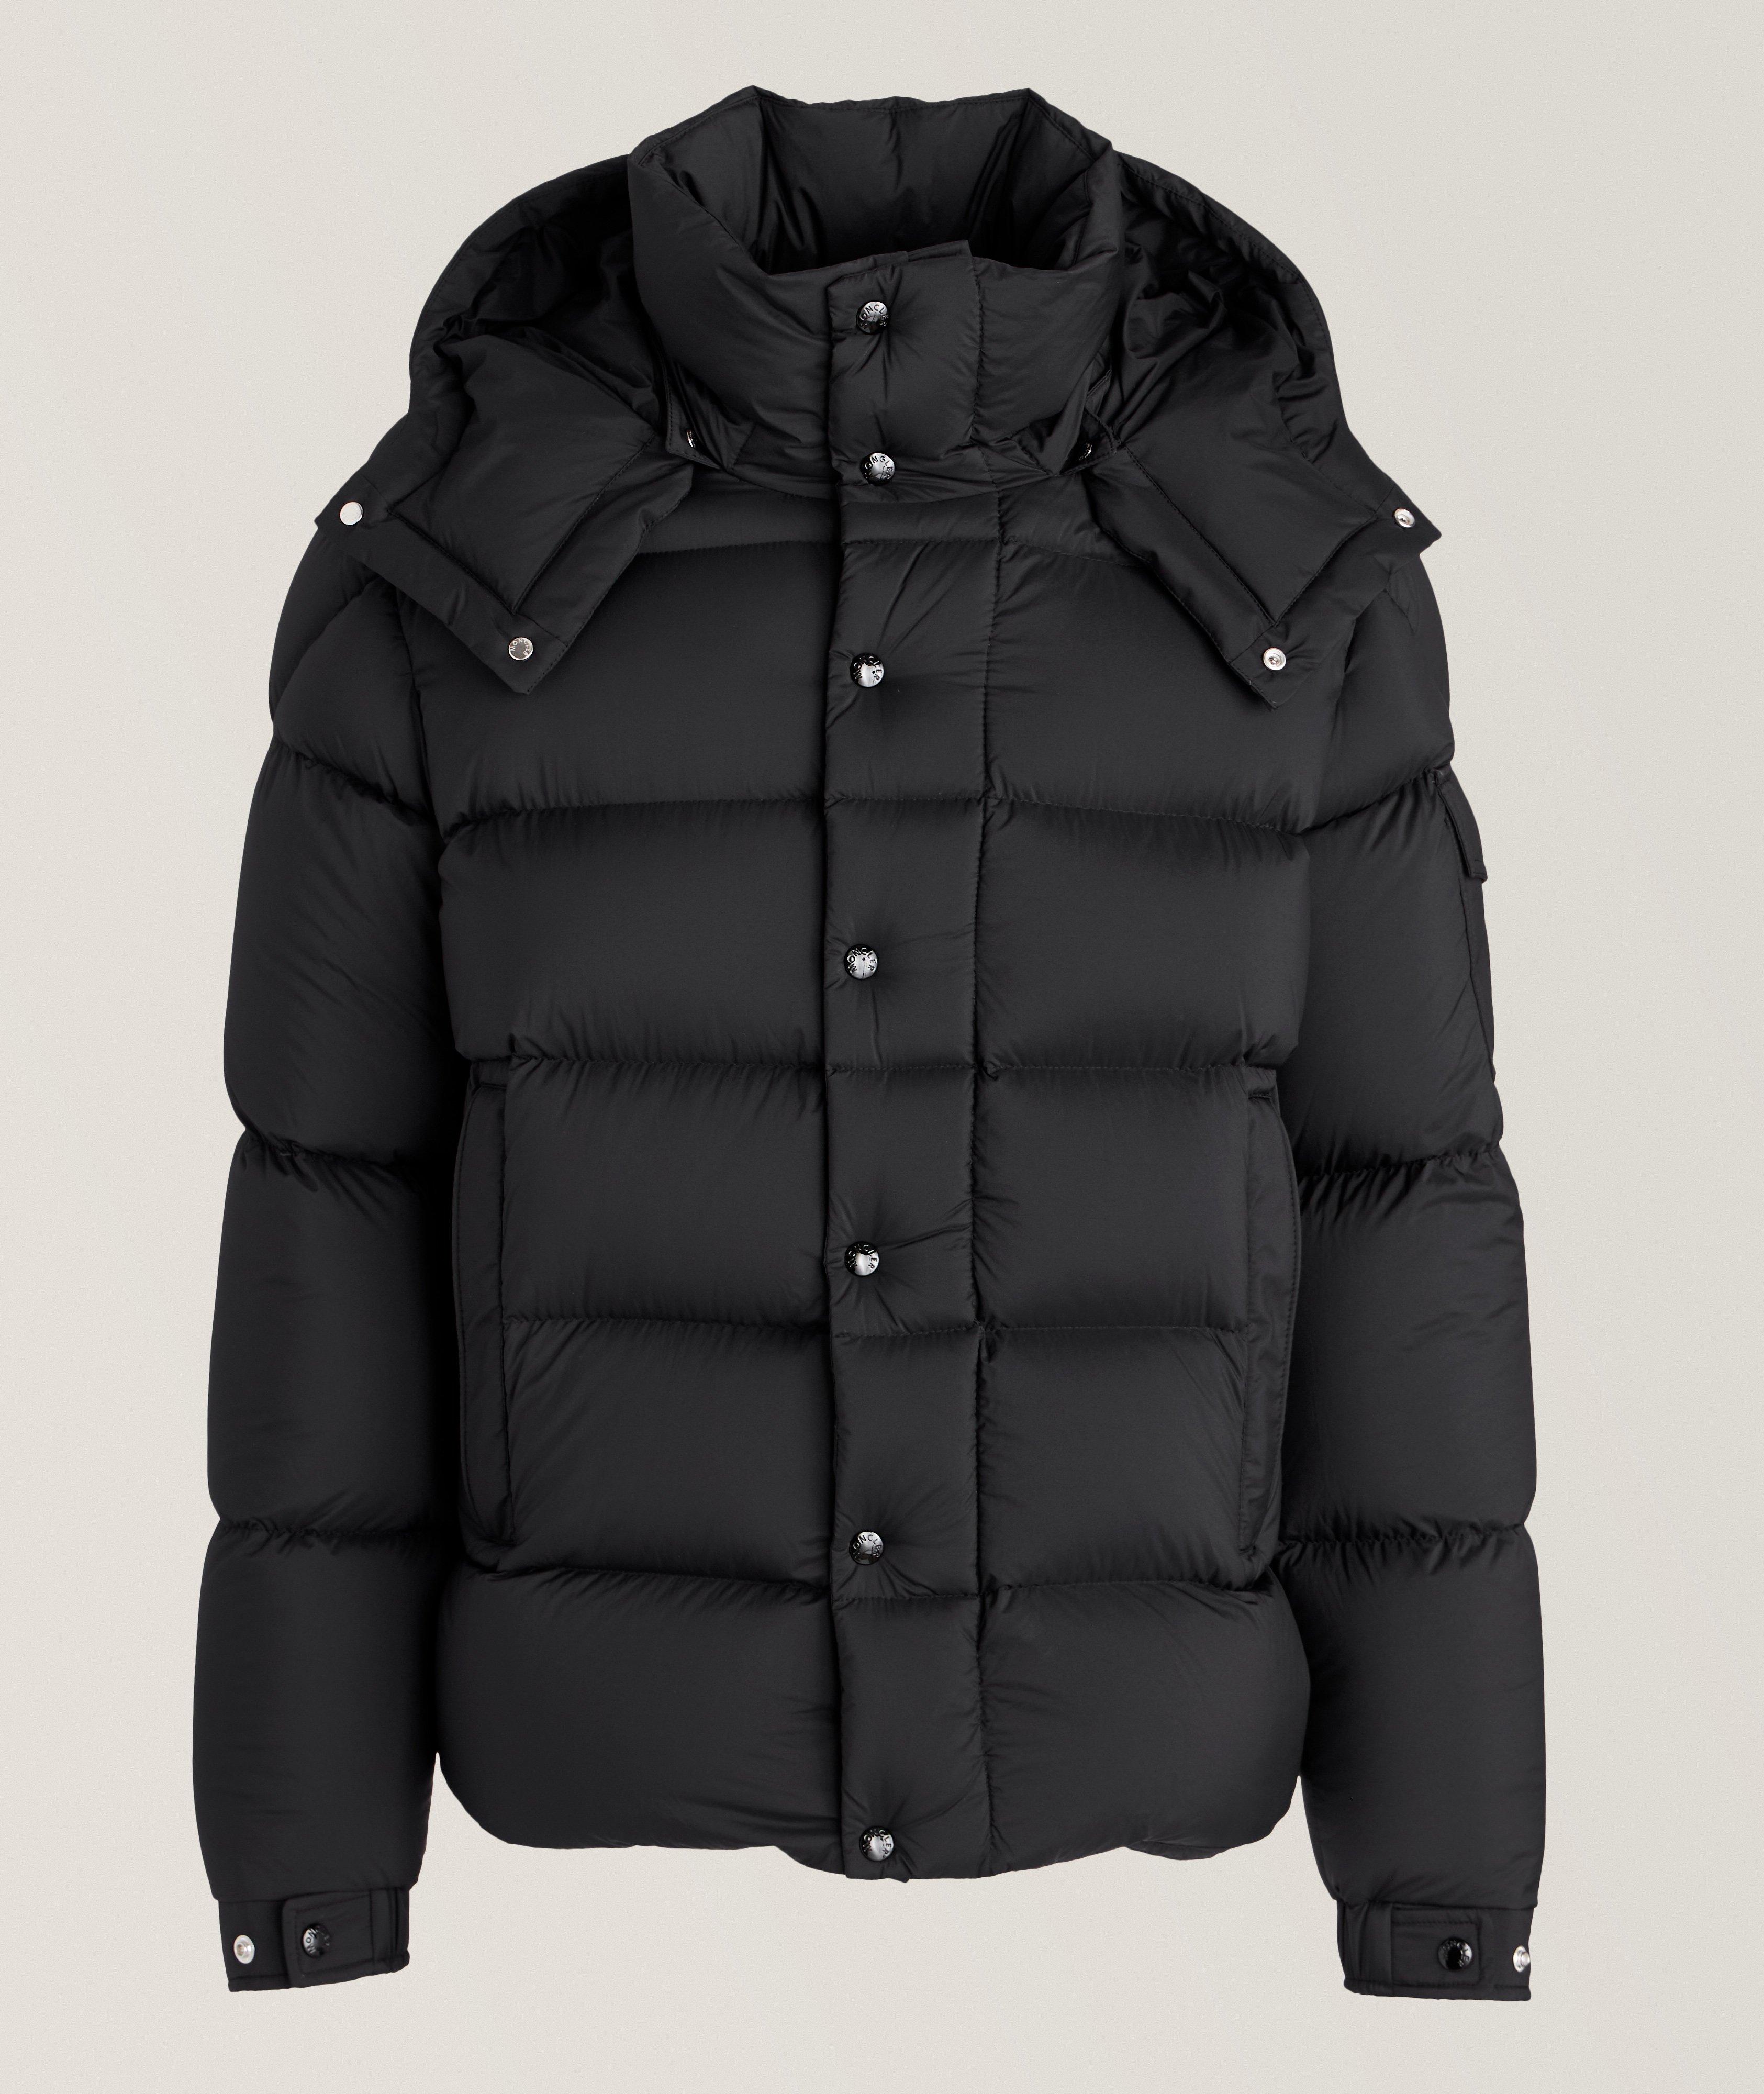 8 of our Favourite Pieces from the Triumph Winter Menswear